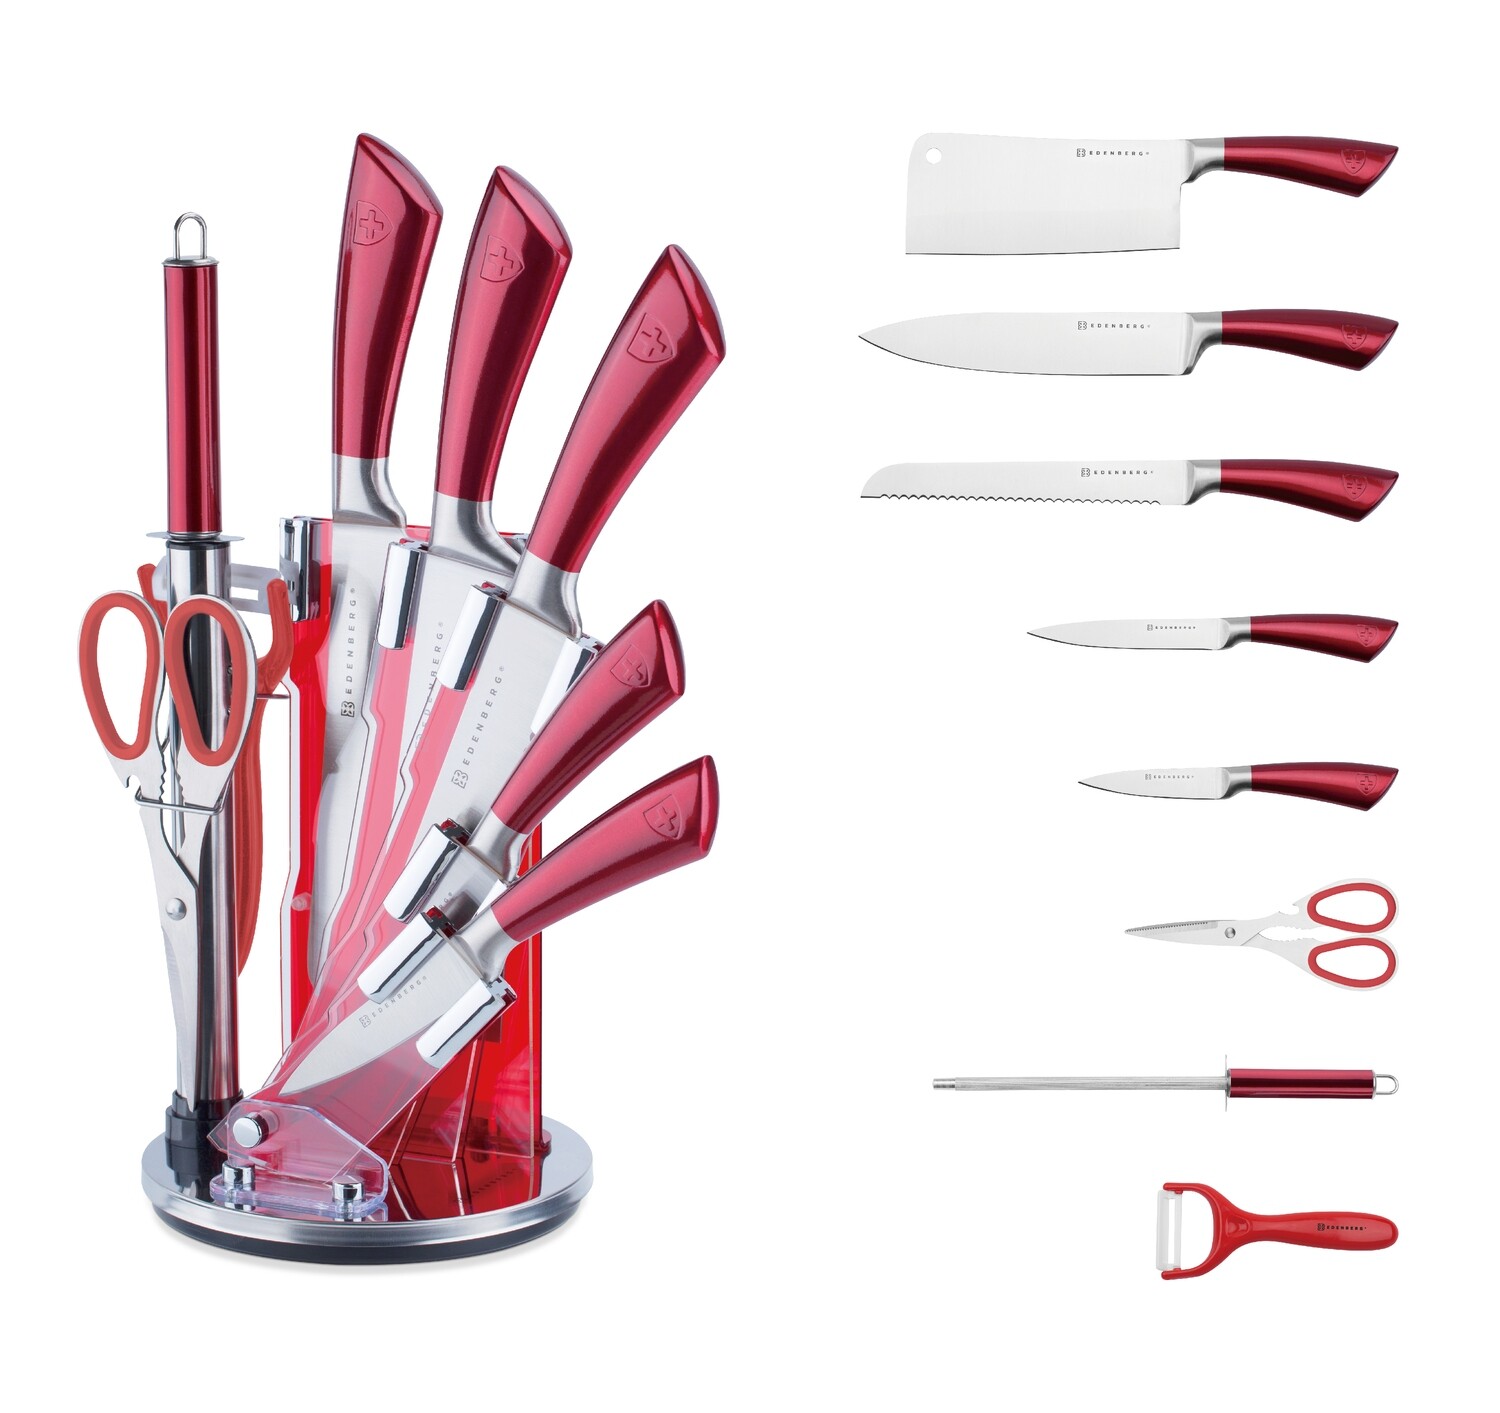 Edenberg 9pcs Knife Set with Acrylic Stand Red Soft Touch Hand w/Peeler EB-3616